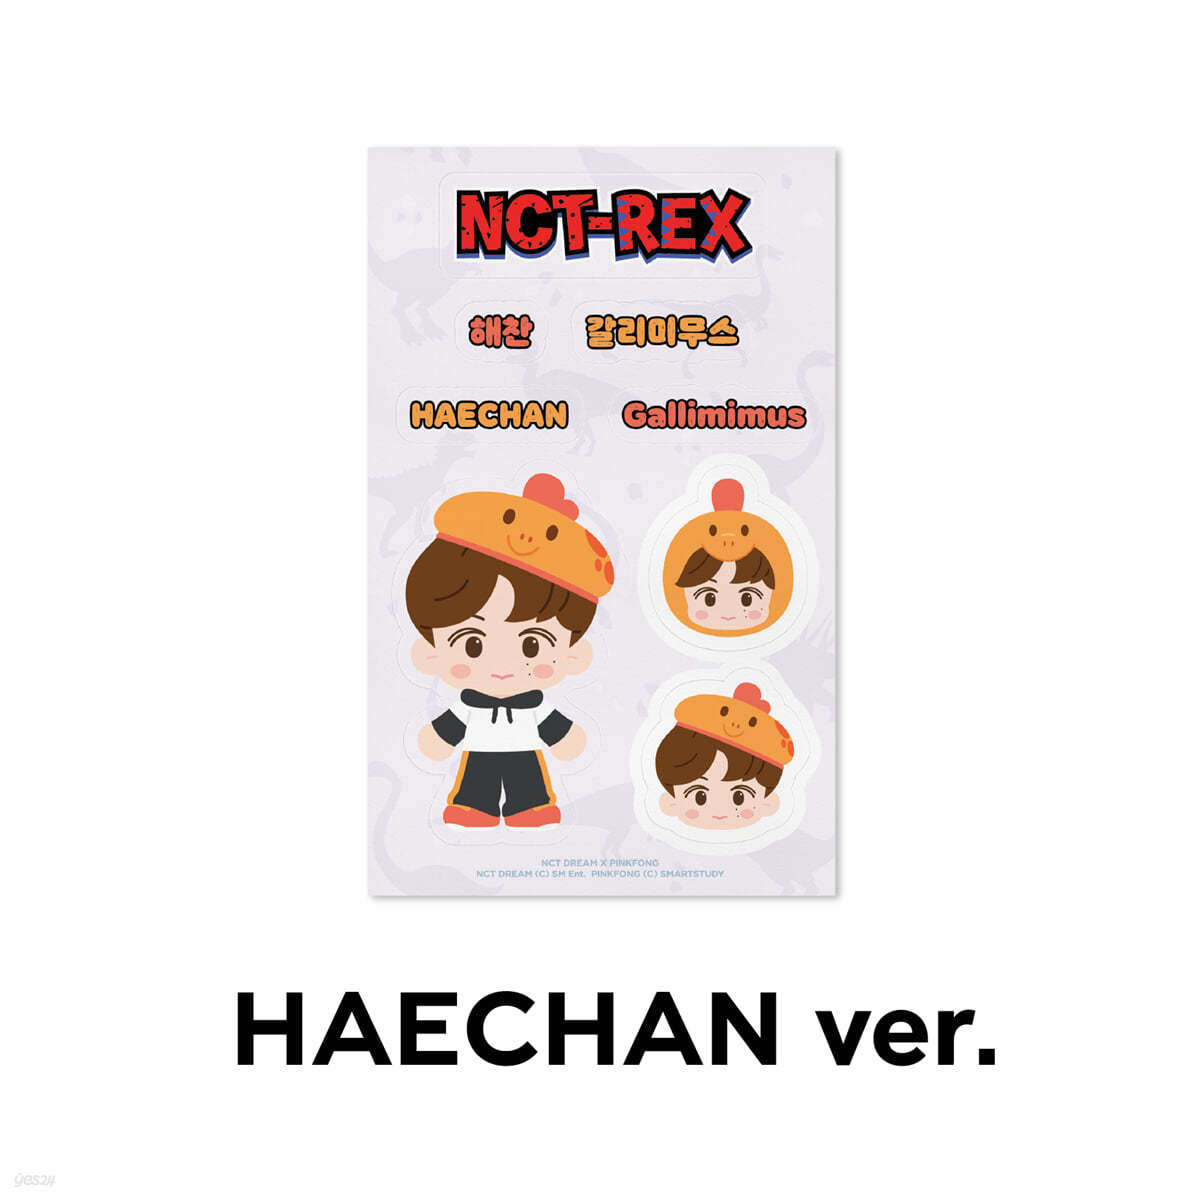 [HAECHAN] REMOVABLE LUGGAGE STICKER - NCT DREAM X PINKFONG 